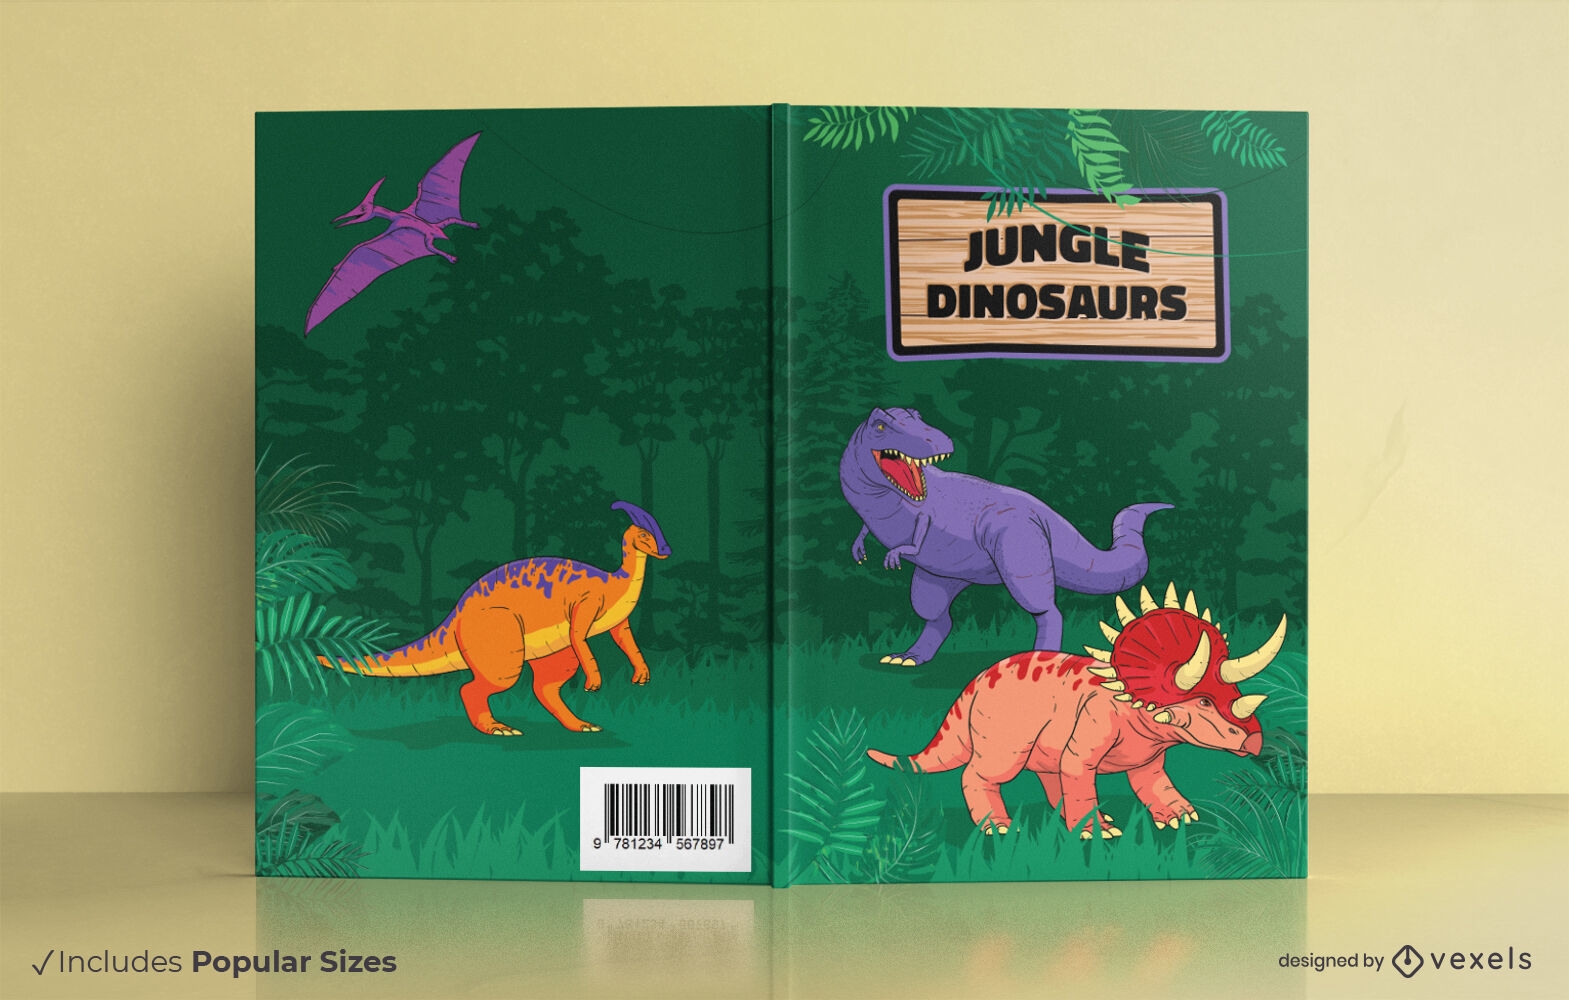 Jungle and dinosaurs book cover design